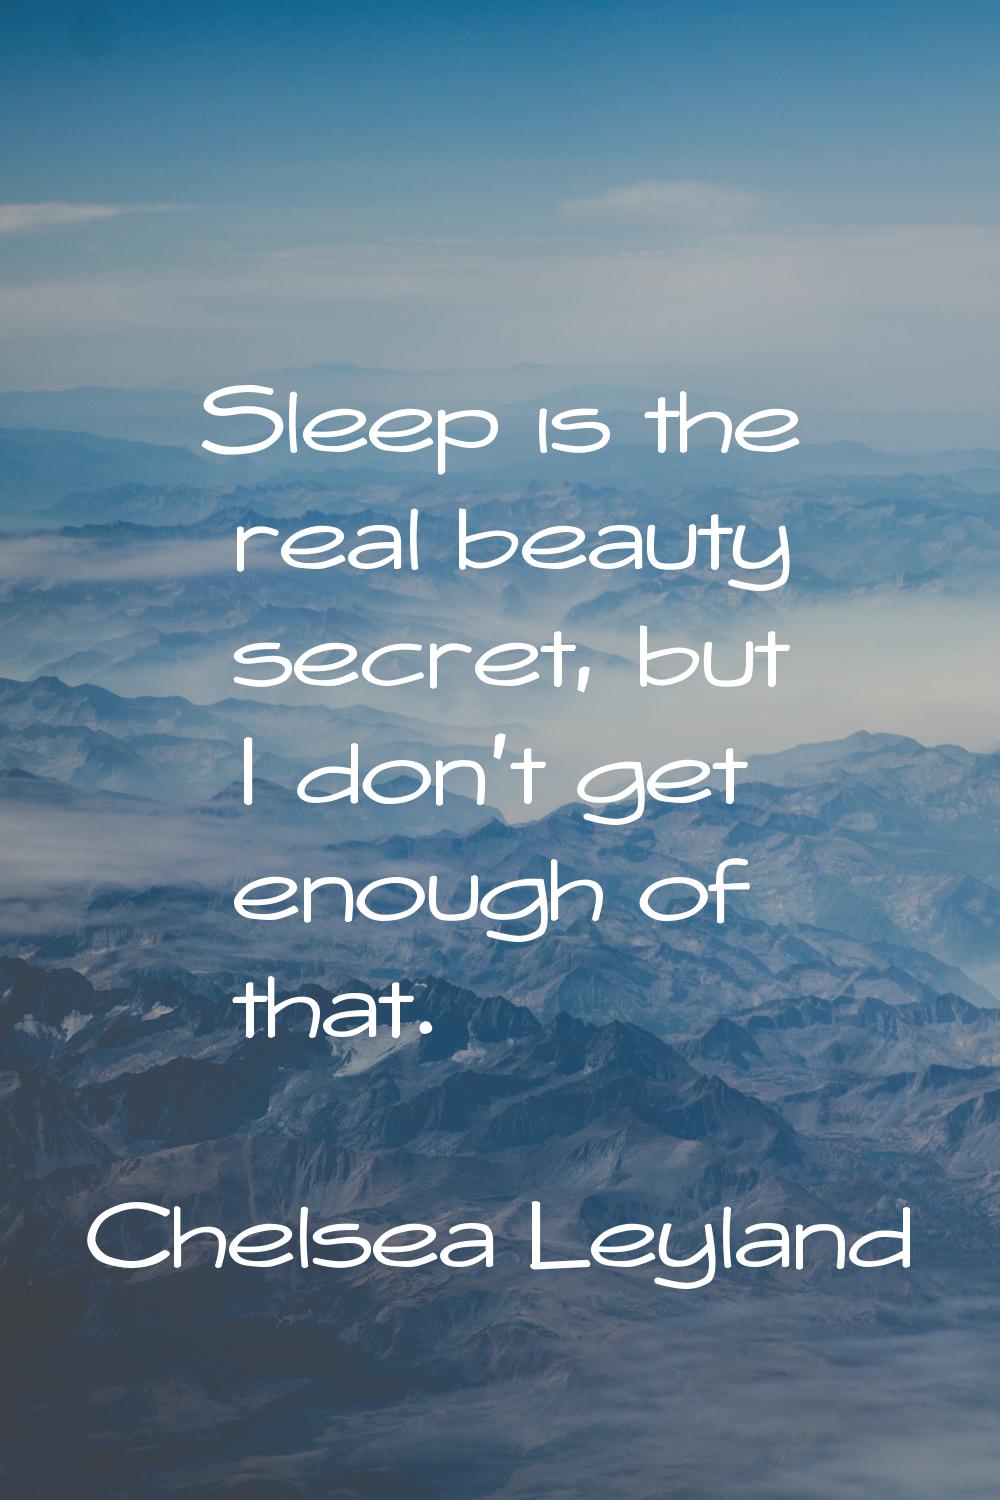 Sleep is the real beauty secret, but I don't get enough of that.